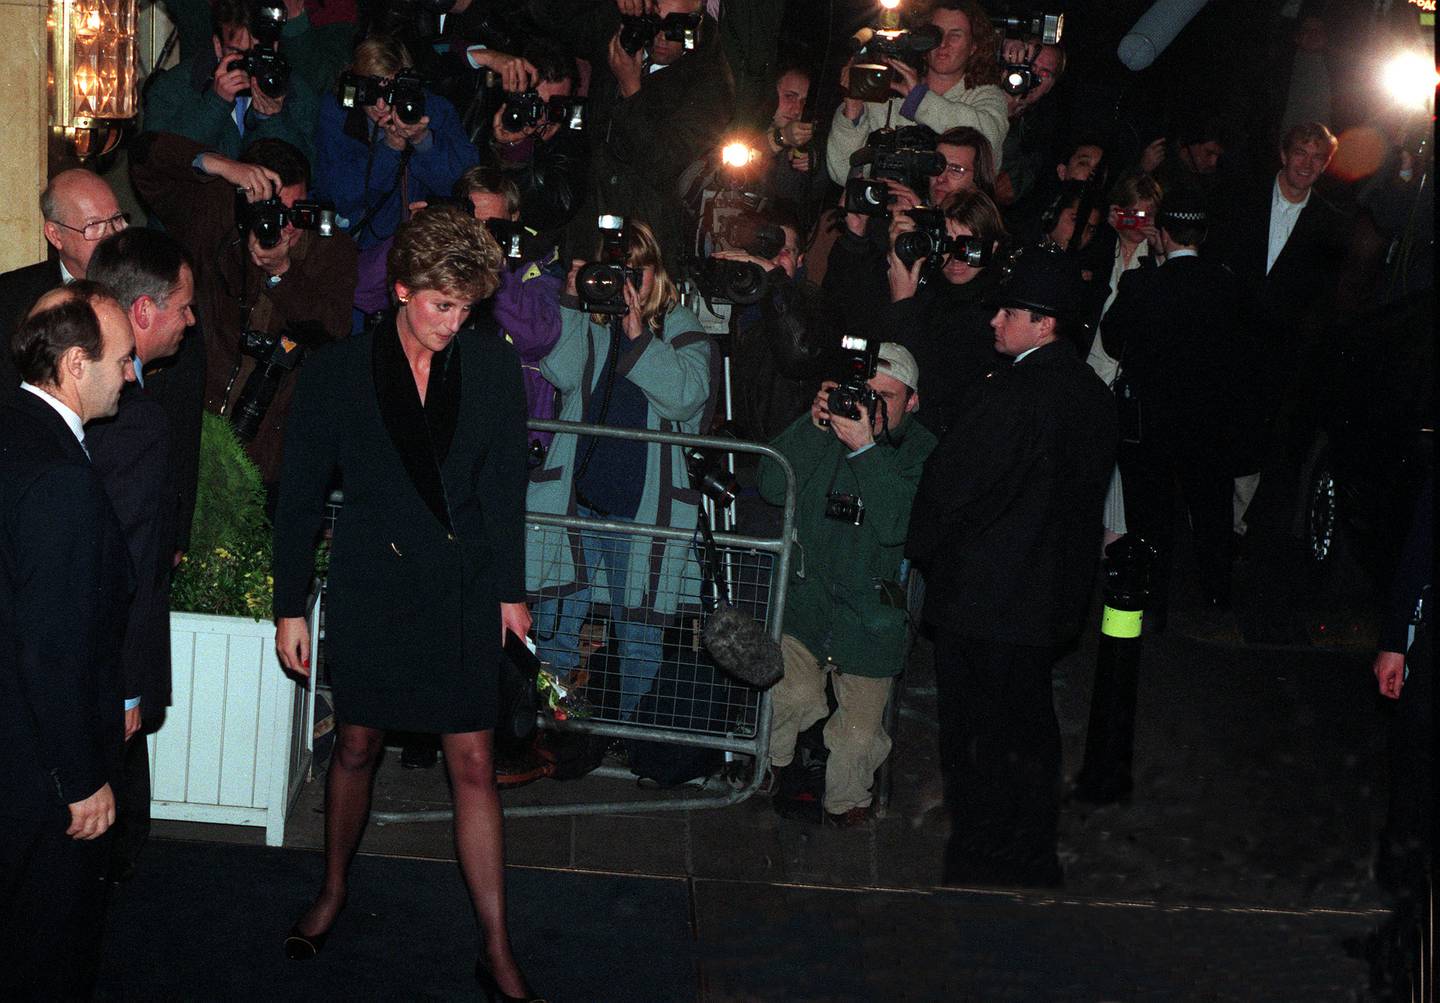 Princess Diana was the most photographed woman in the world during her lifetime. PA